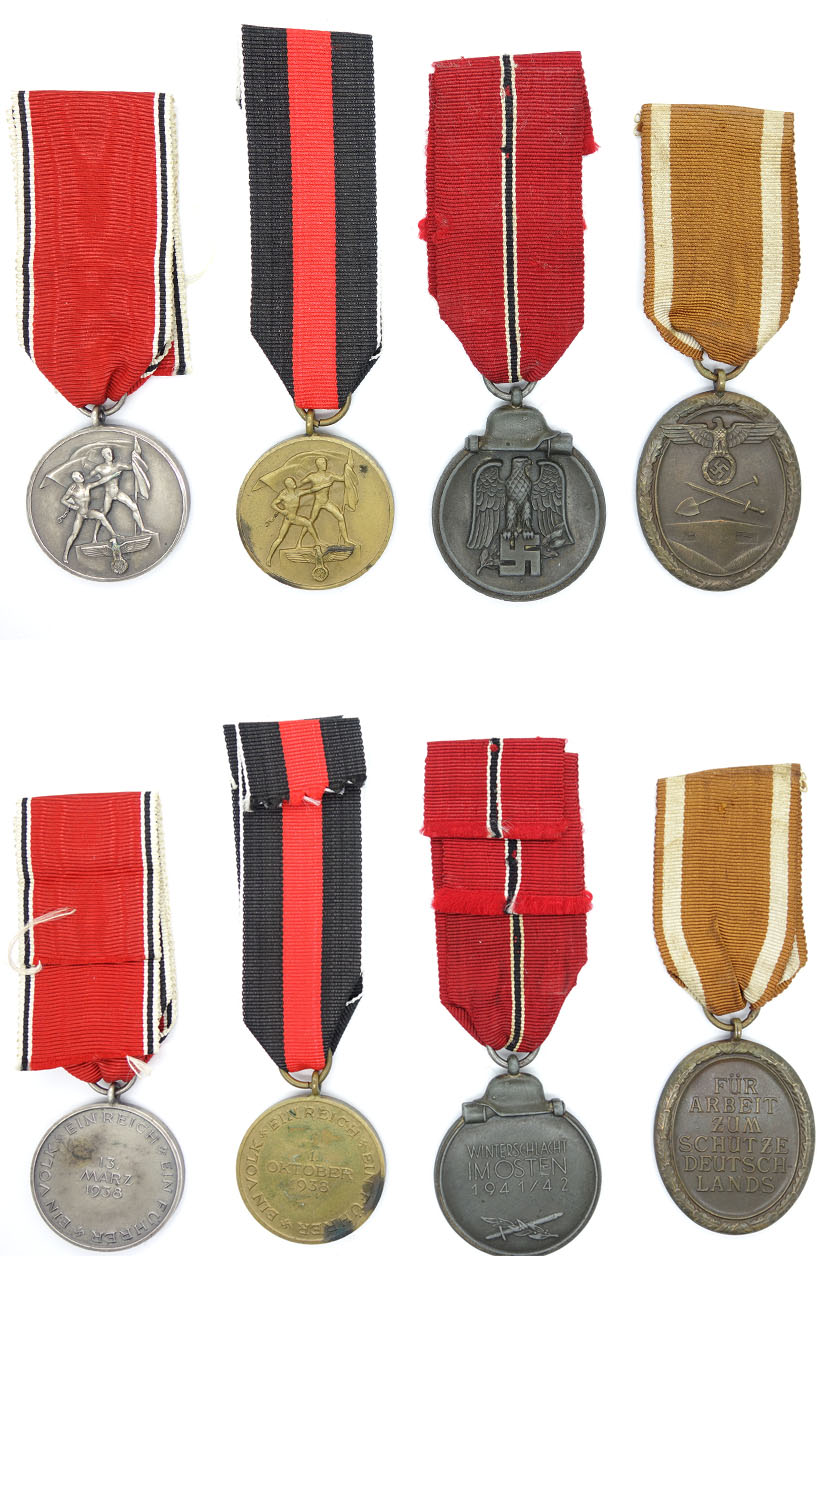 4 Campaign Medals